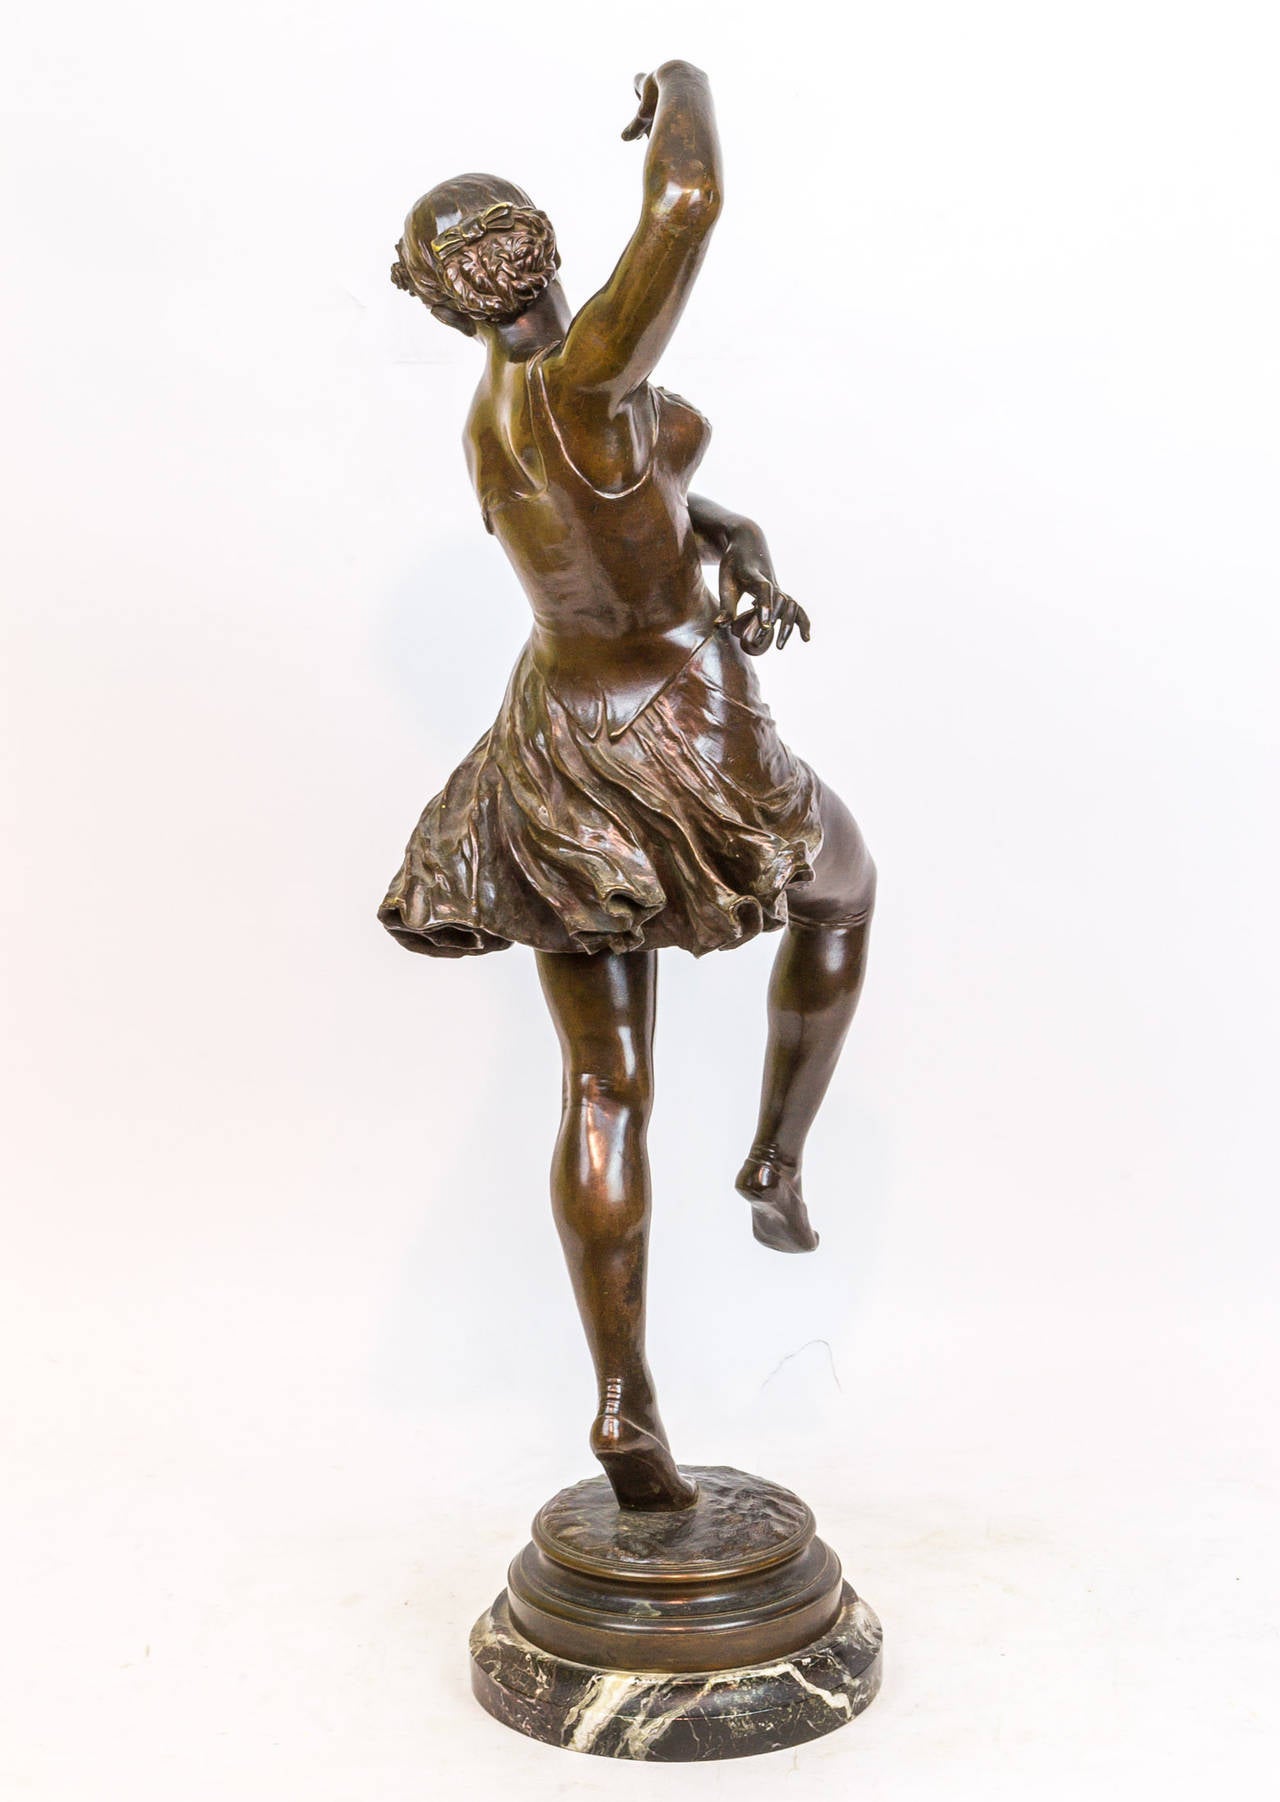 French Patinated Bronze Figure of a Ballerina Dancer, Signed A. Boucher